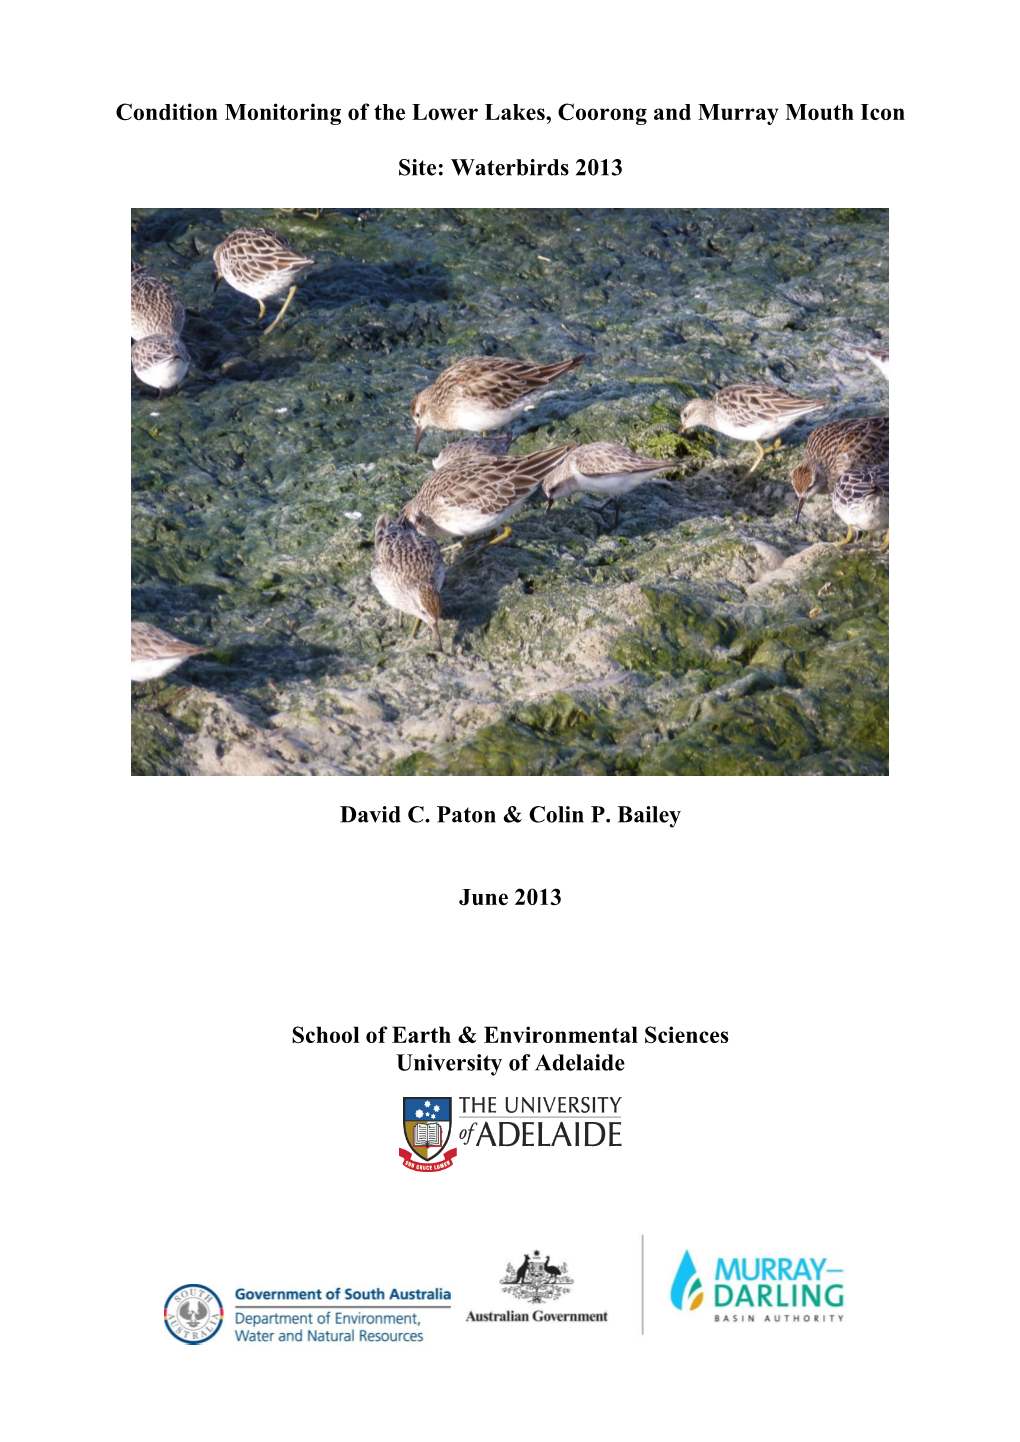 Condition Monitoring of Indicator Bird Species in the Lower Lakes